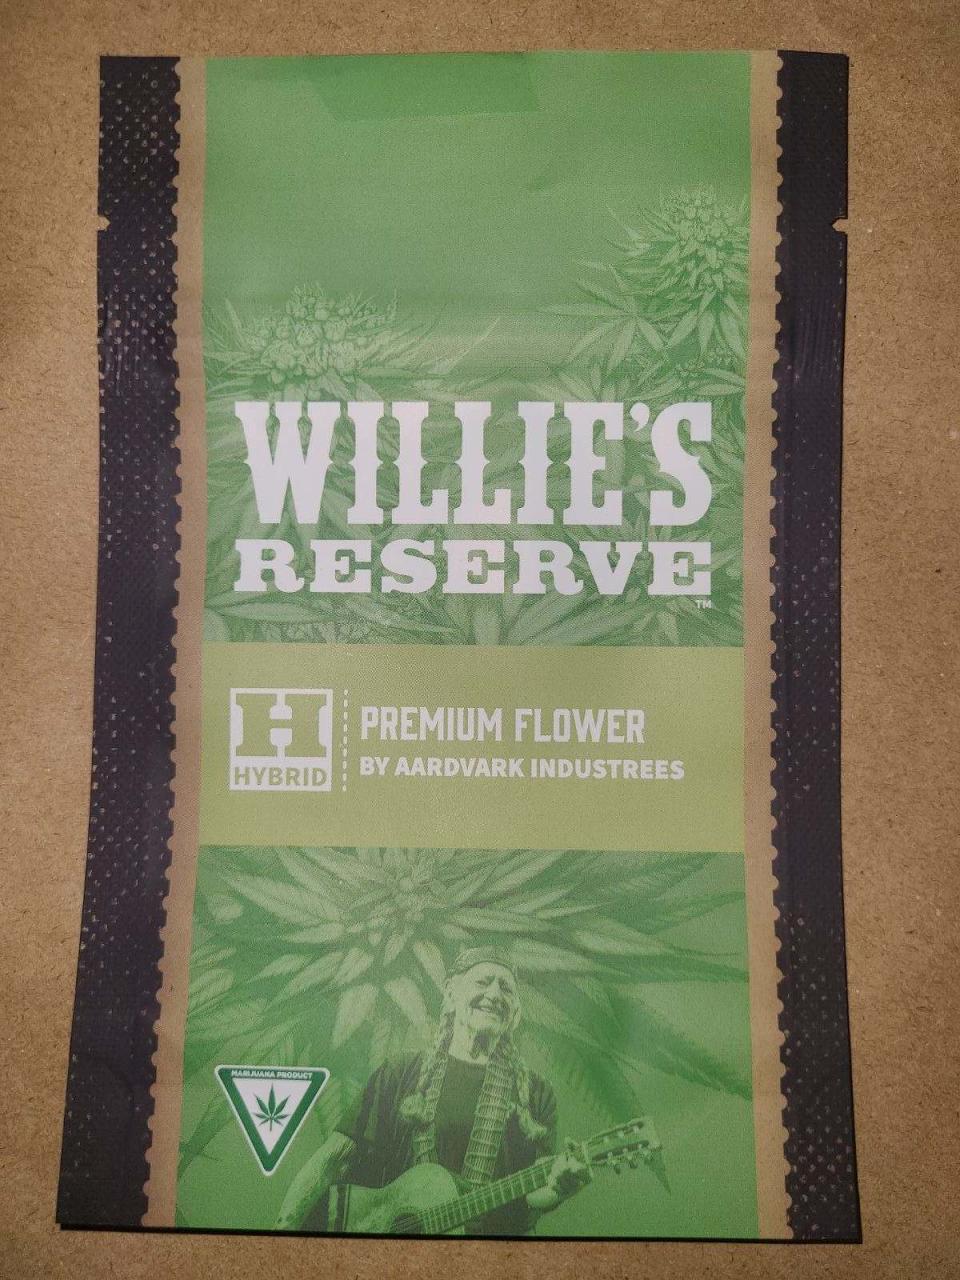 Country singer Willie Nelson's cannabis line, called Willie’s Reserve, is available for purchase at several marijuana dispensaries around Michigan.